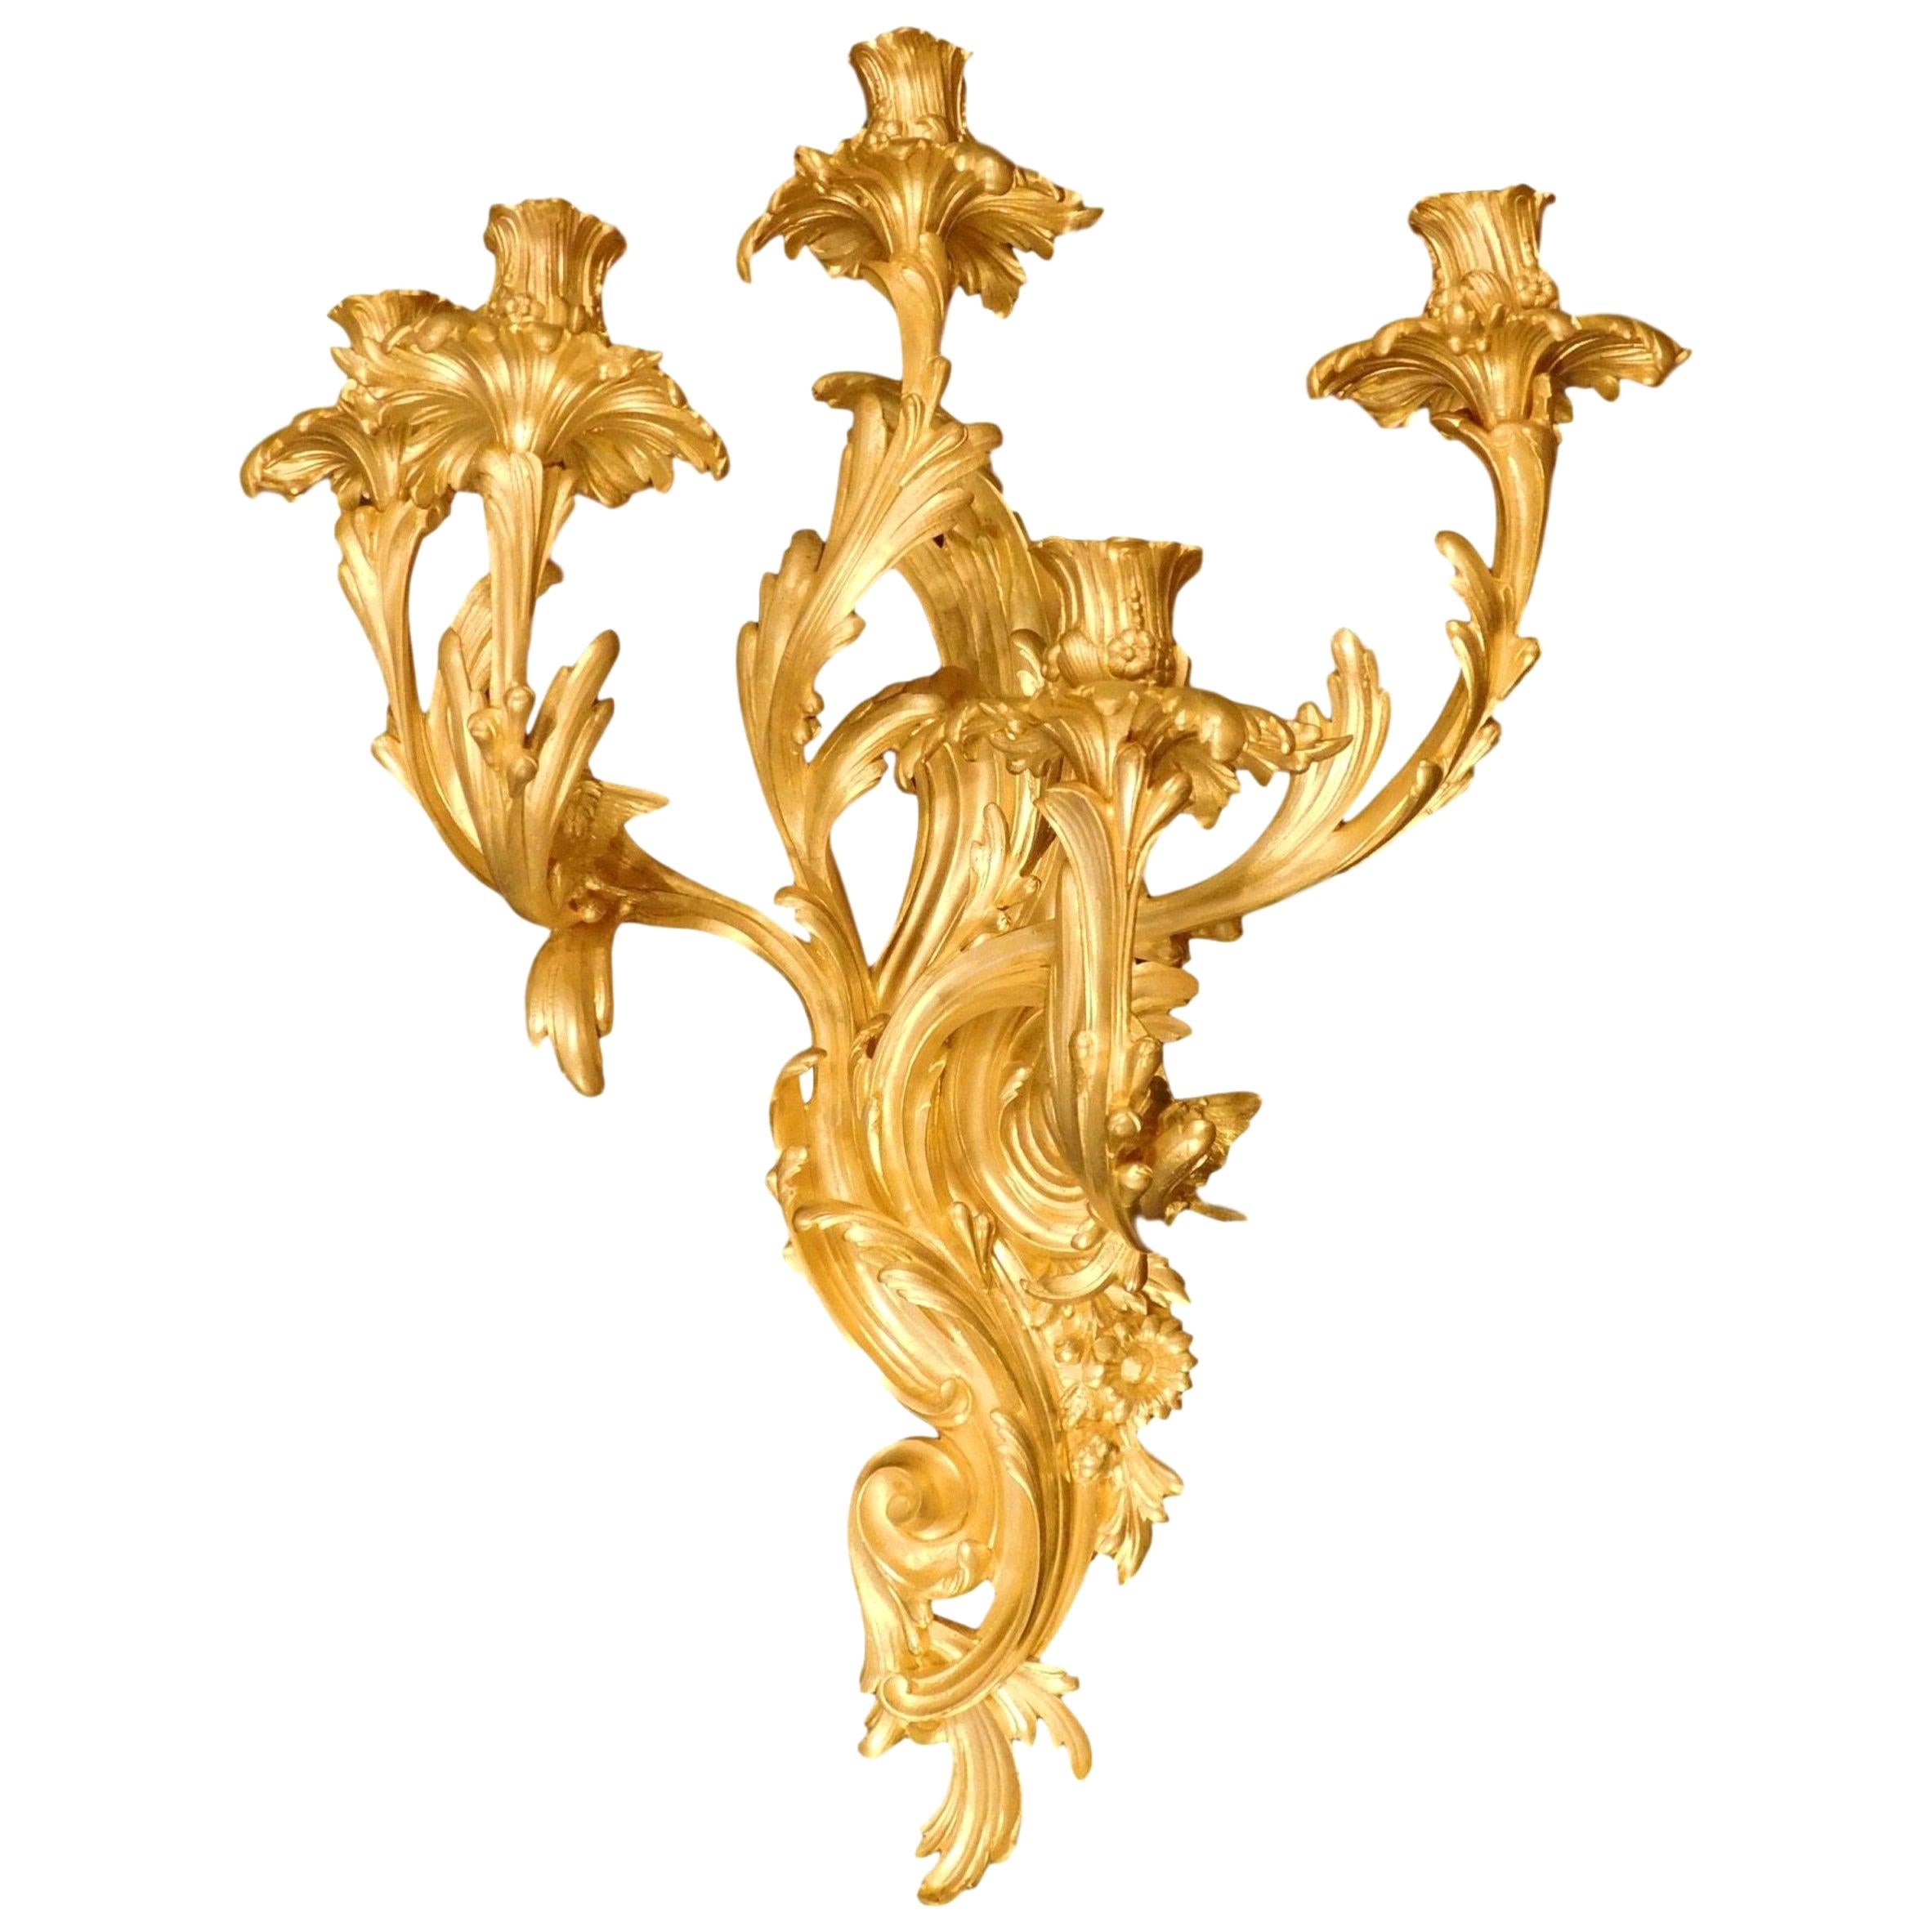 Pair of Napoleon III Gold Bronze Candle Sconces by Victor Paillard, Paris, 1860 For Sale